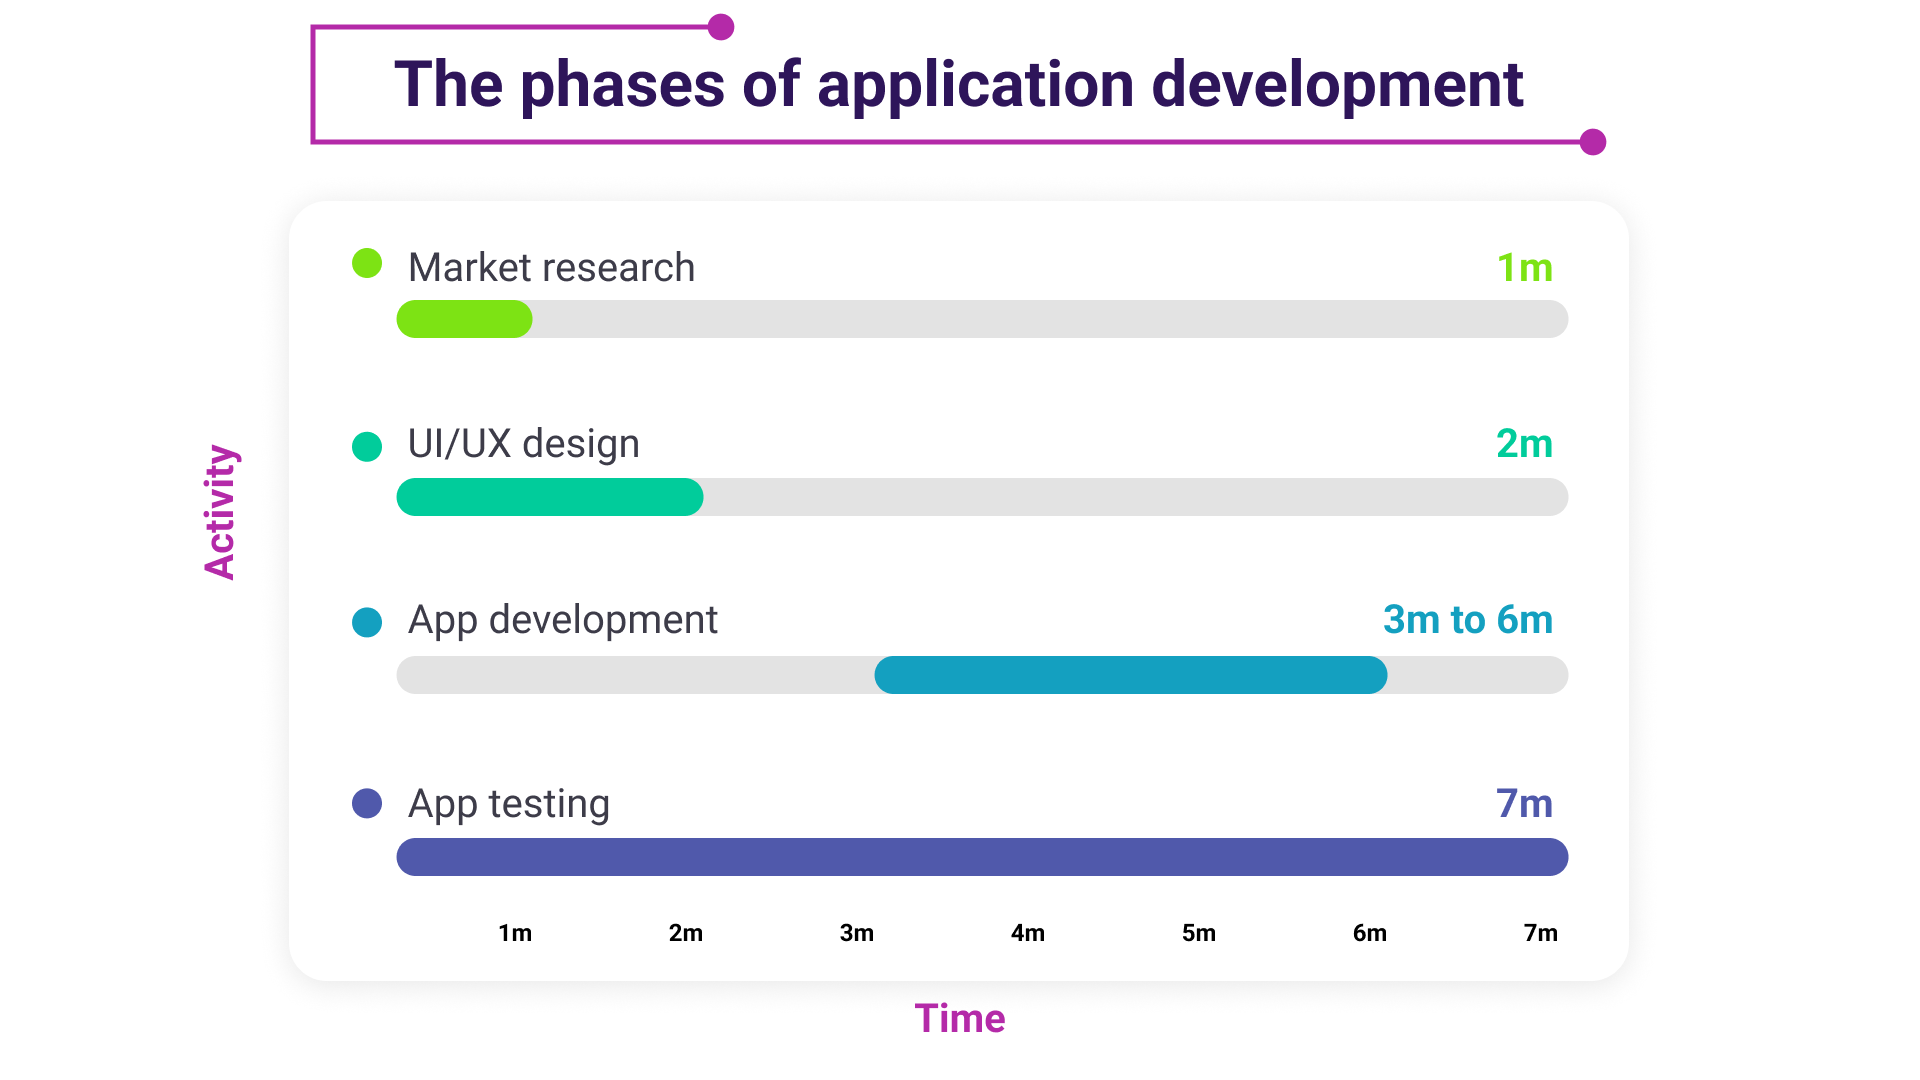 The phases of application development